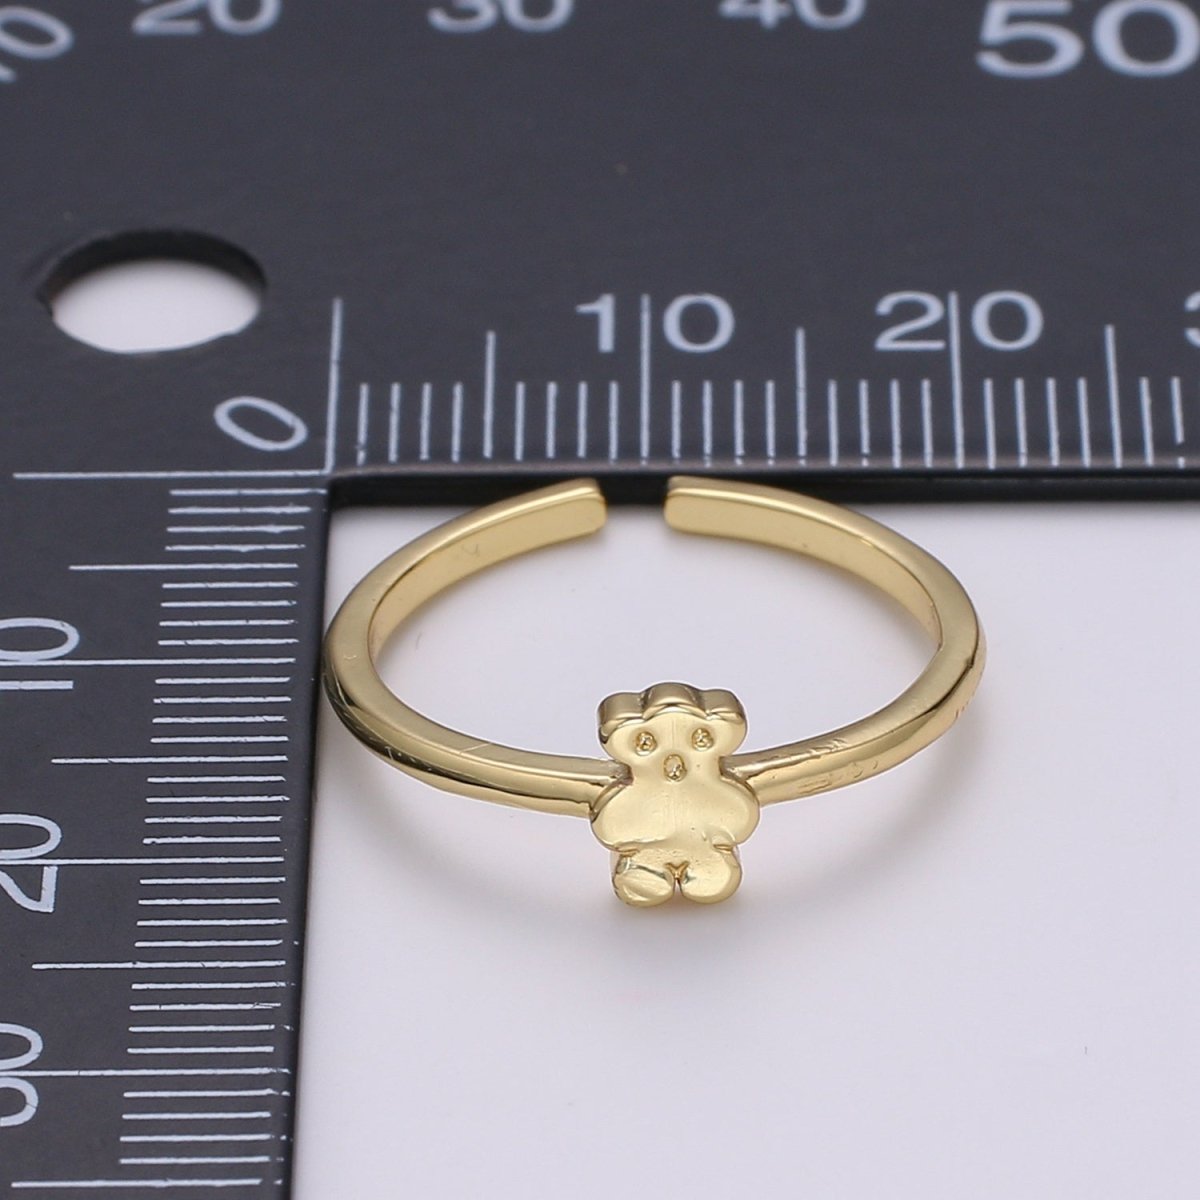 Dainty Open Ring Adjustable Cute Teddy Bear Ring Dainty Animal Toy Ring Romantic Love Stackable Ring for Kids Daughter Jewelry Gift Idea - DLUXCA